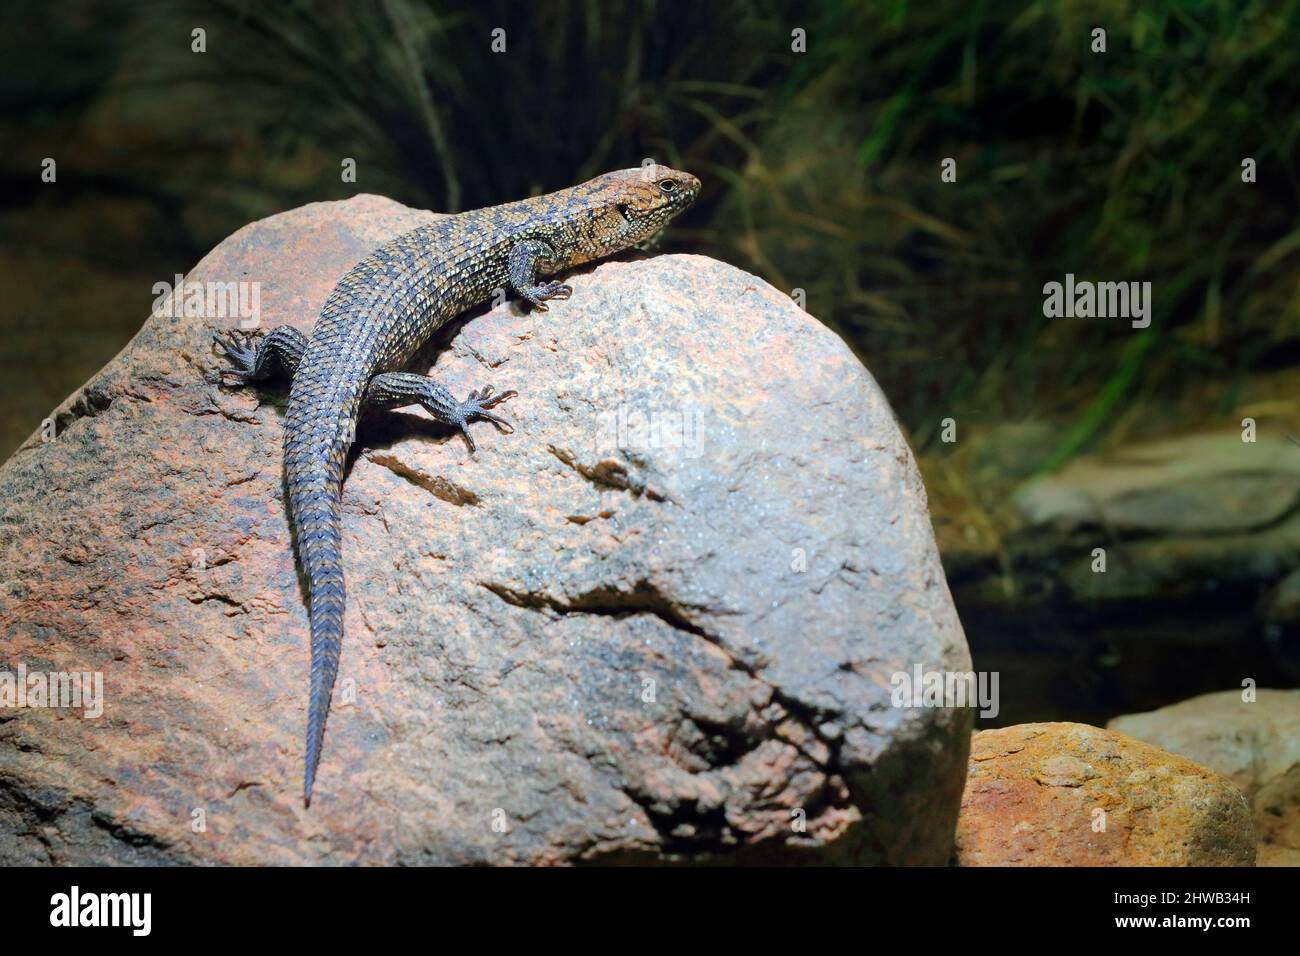 Cunningham's spiny-tailed skink, Egernia cunninghami, large lizard sitting on the stone in the nature habitat. Big reptile from Australia. Skink in th Stock Photo